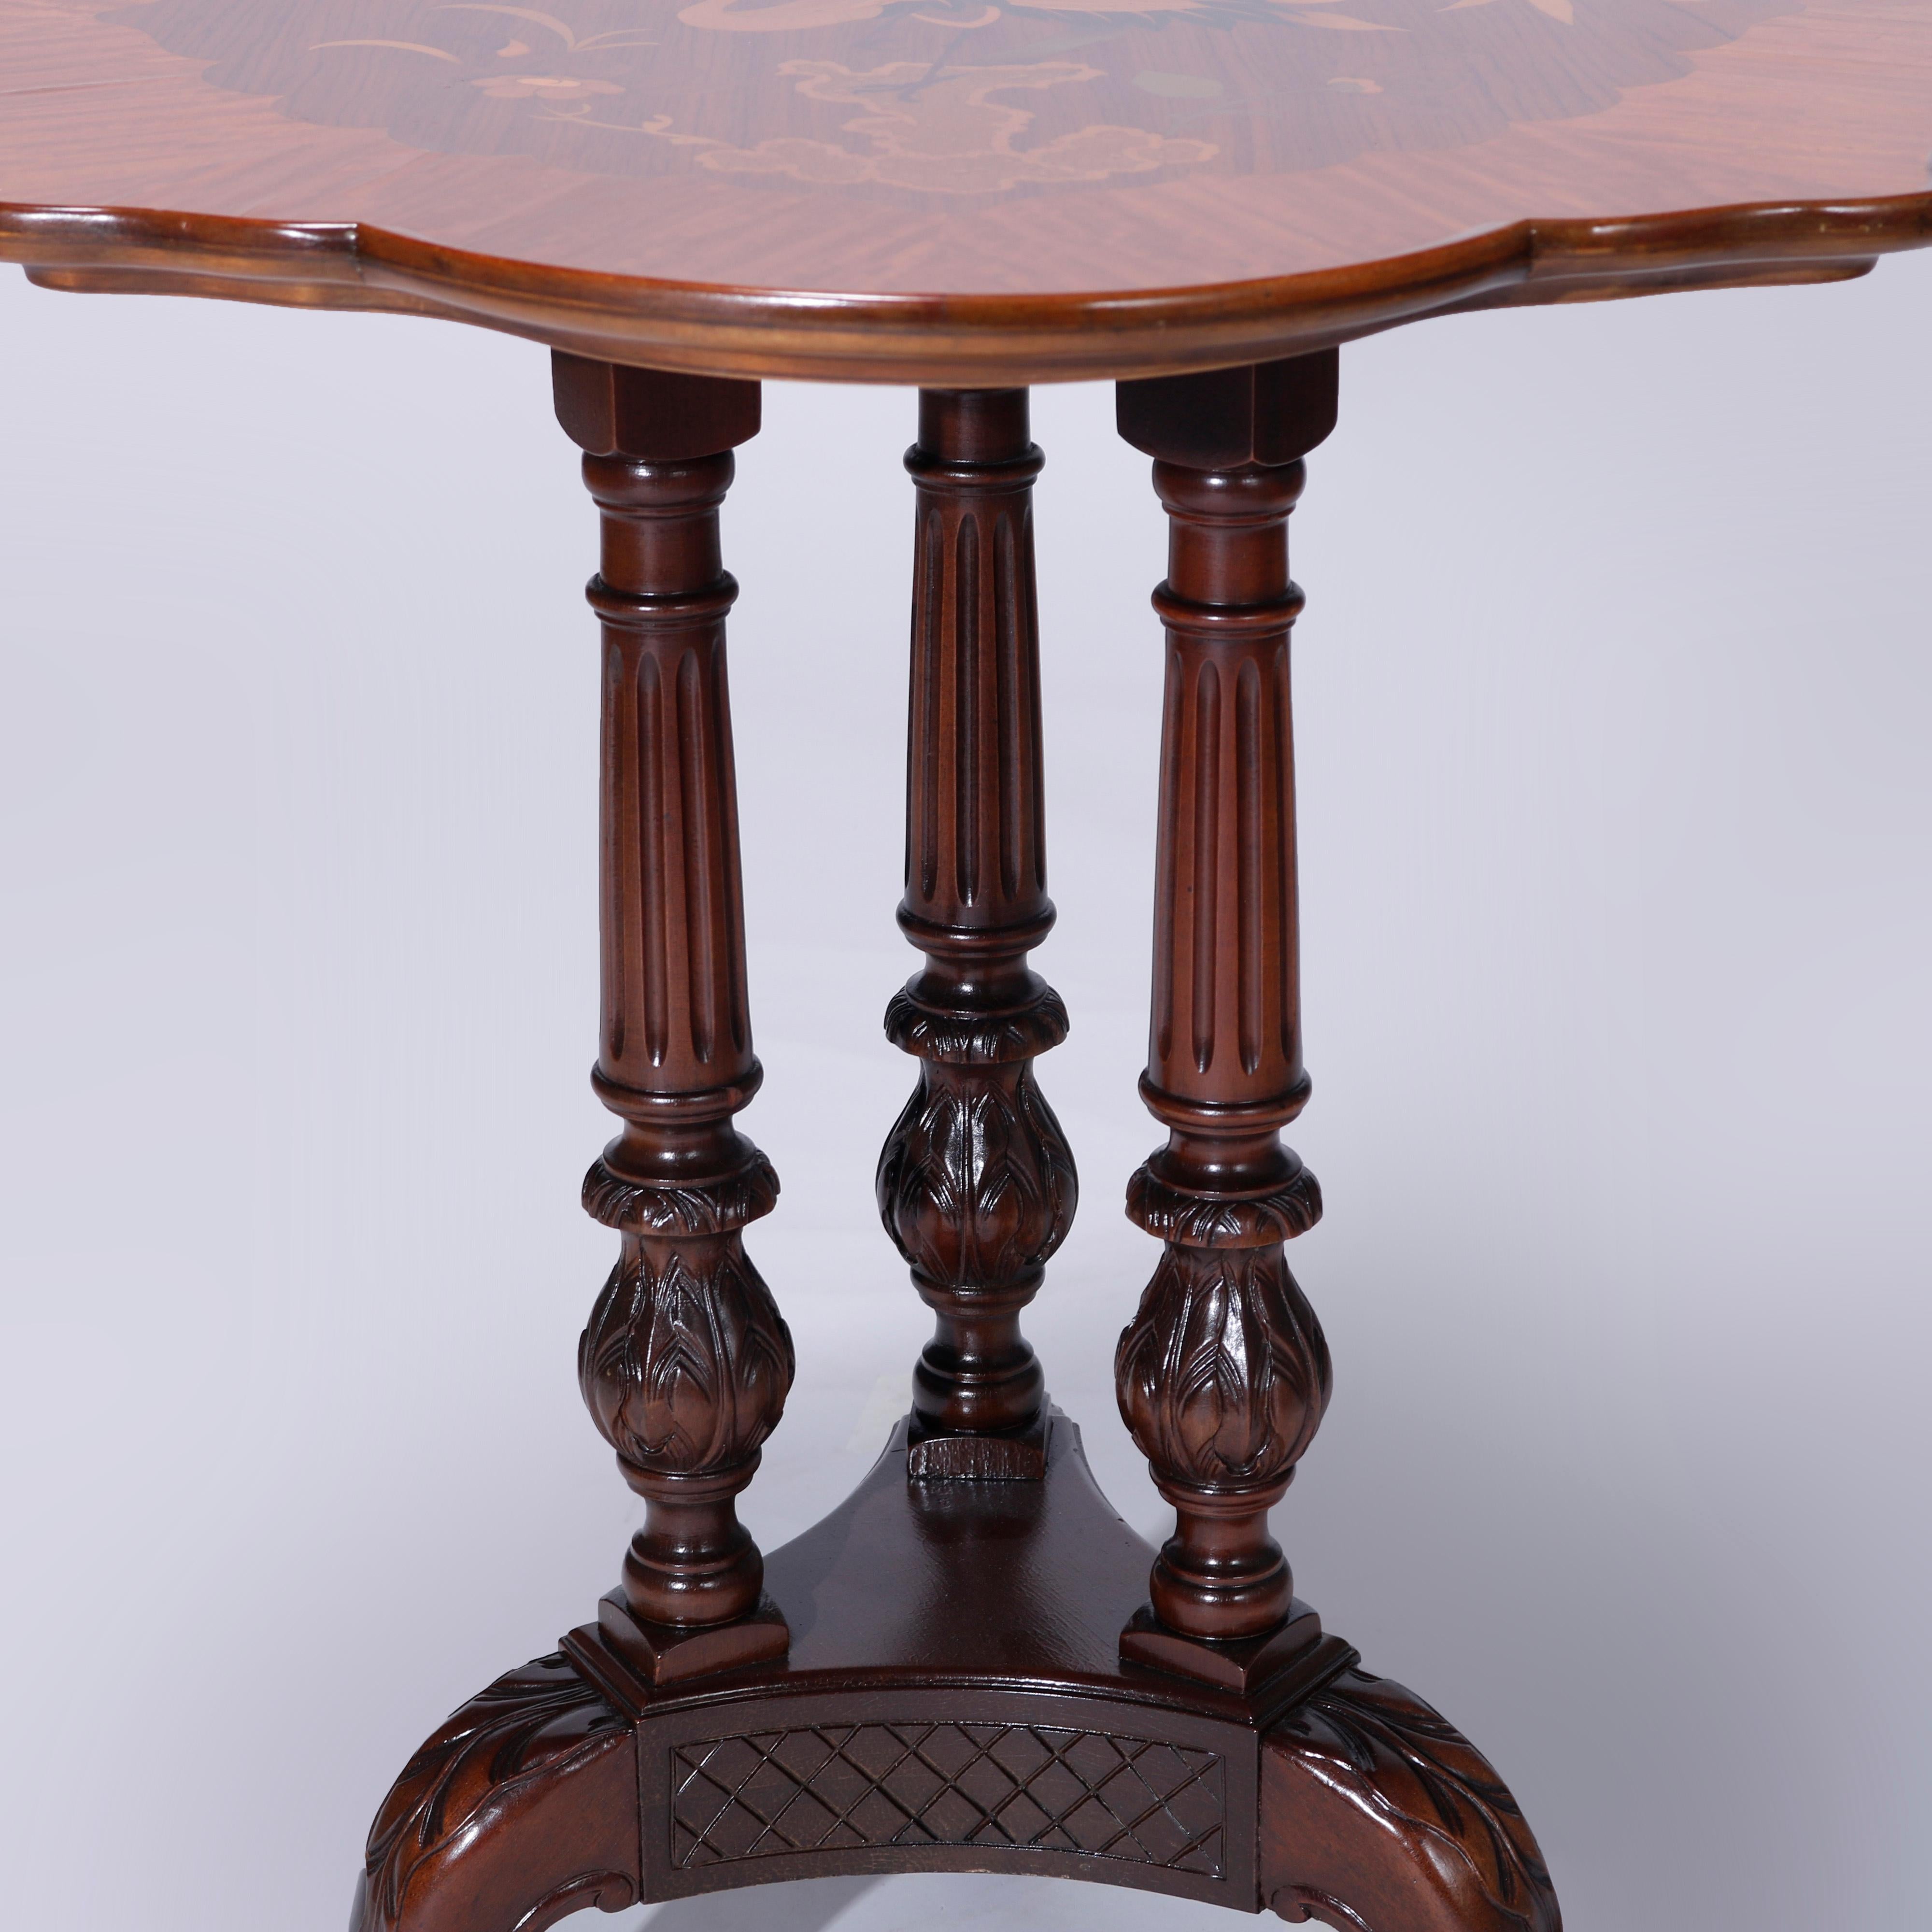 Antique Heron Satinwood Marquetry Scalloped Triple Pedestal Side Tables, c1930 For Sale 5